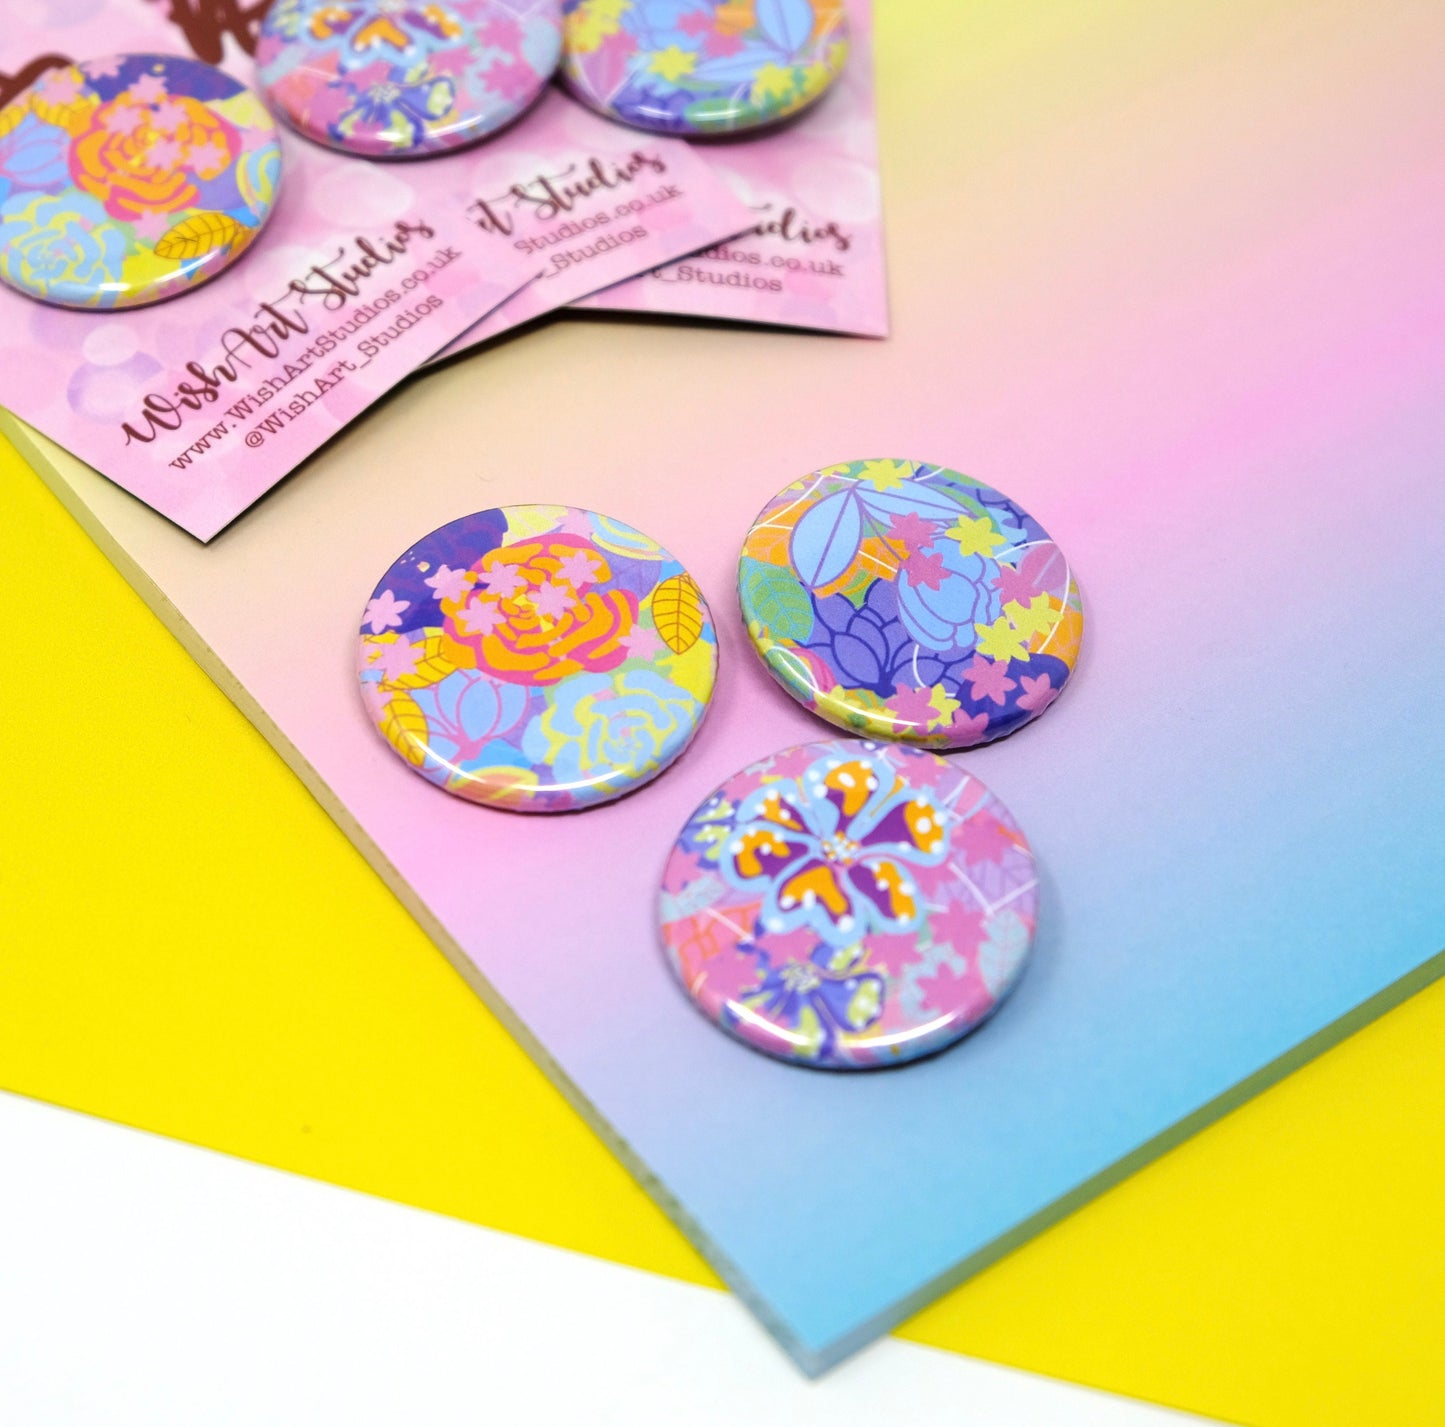 Bold Botanical's Wild Collection - 38mm Colourful Metal Pin Button Badge - Cute Floral Badges In 3 Unique Designs